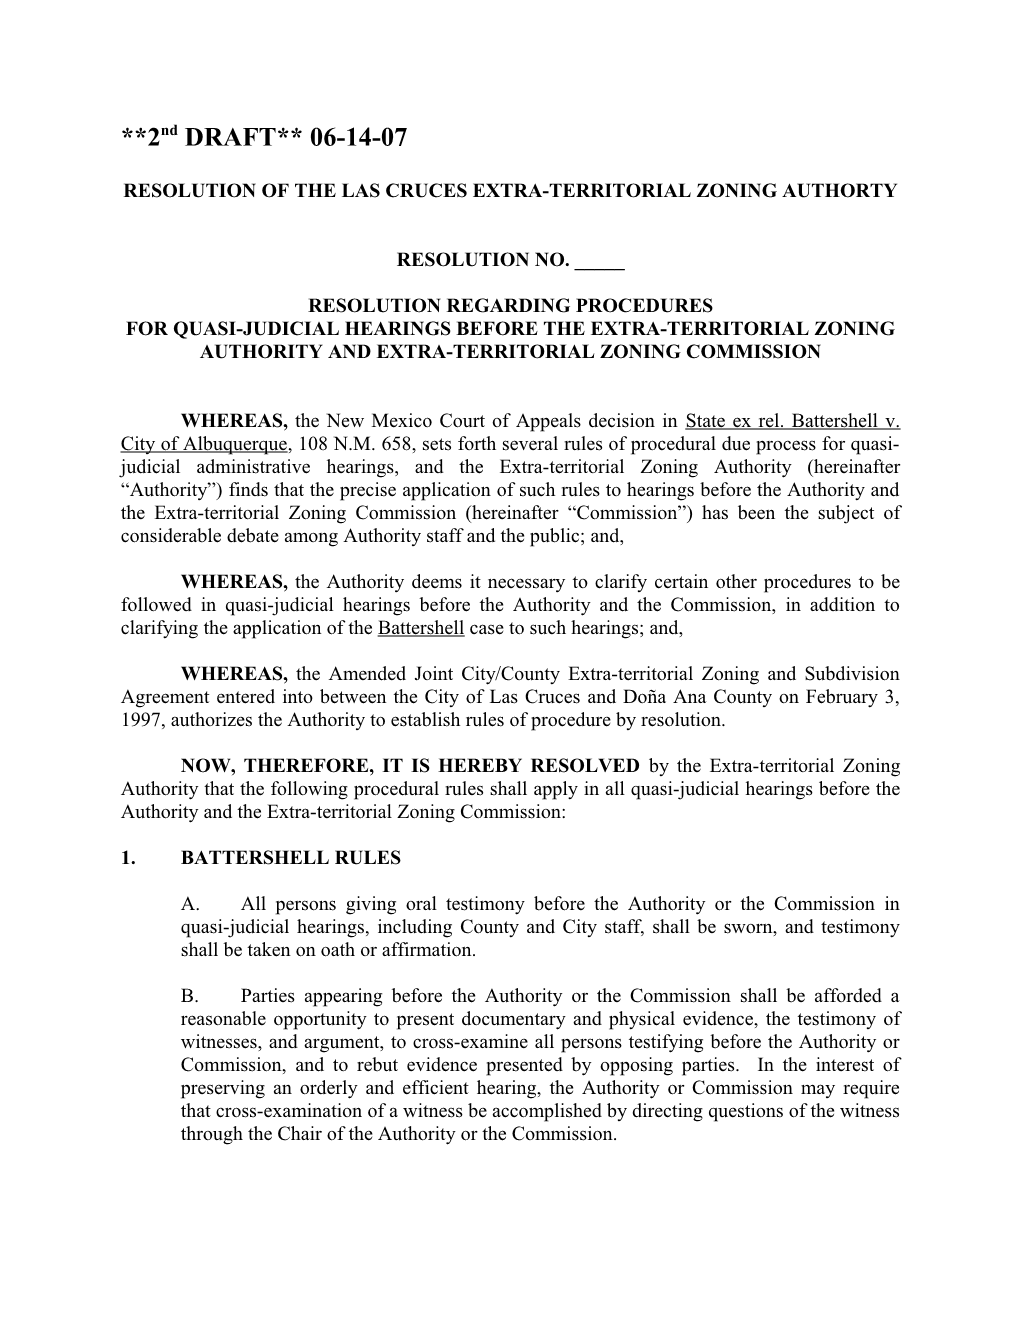 Resolution of the Las Cruces Extra-Territorial Zoning Authorty